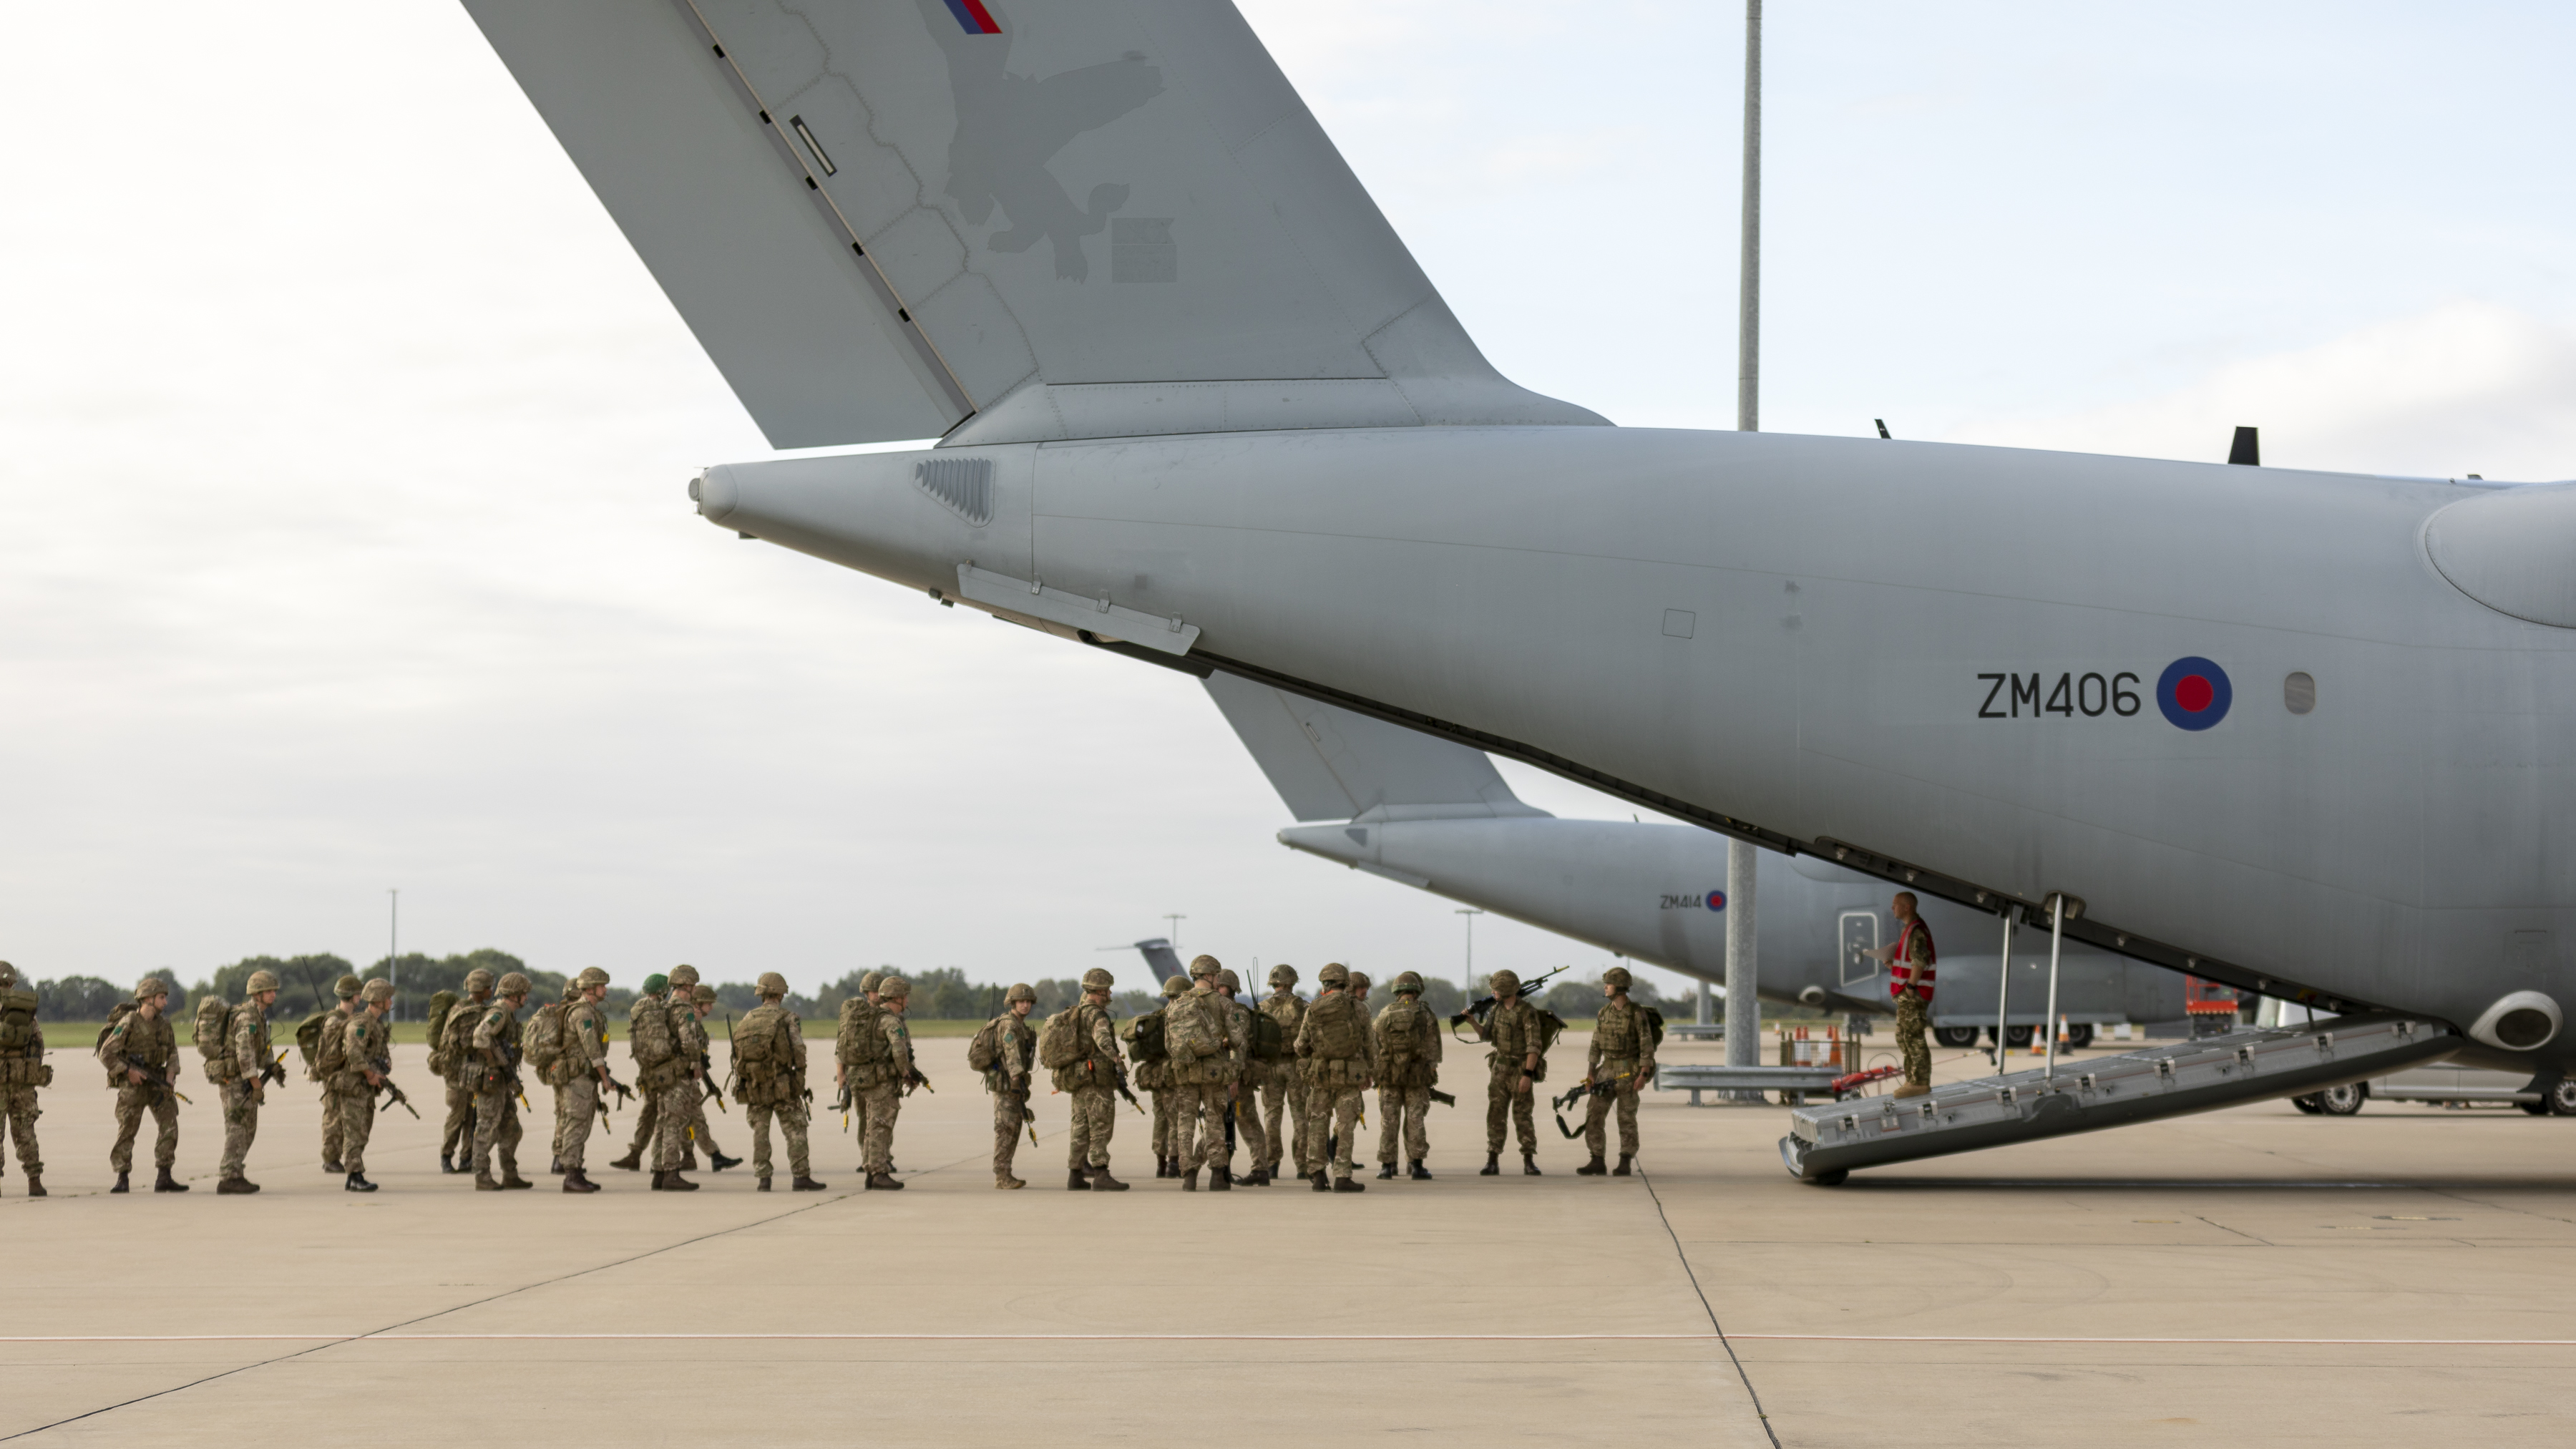 Image shows RAF personnel standing by the loading bay of Atlas aircraft.